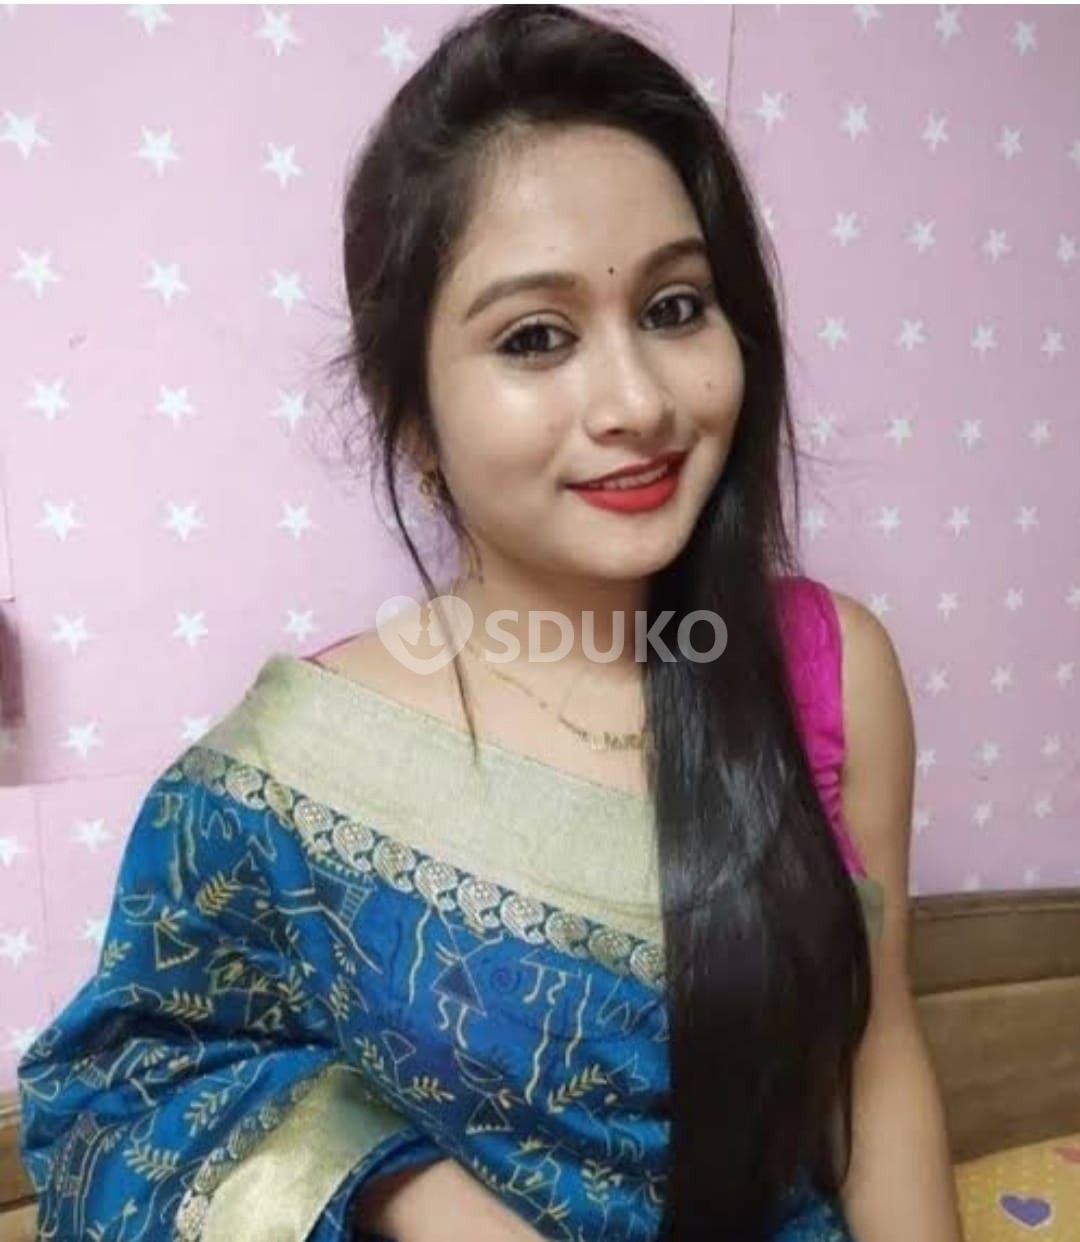 Manapakkam🌟 █▬█⓿▀█▀ 𝐆𝐈𝐑𝐋 𝐇𝐎𝐓 𝐀𝐍𝐃 𝐒𝐄XY GIRLS AND HOUSEWIFE AVAILABL